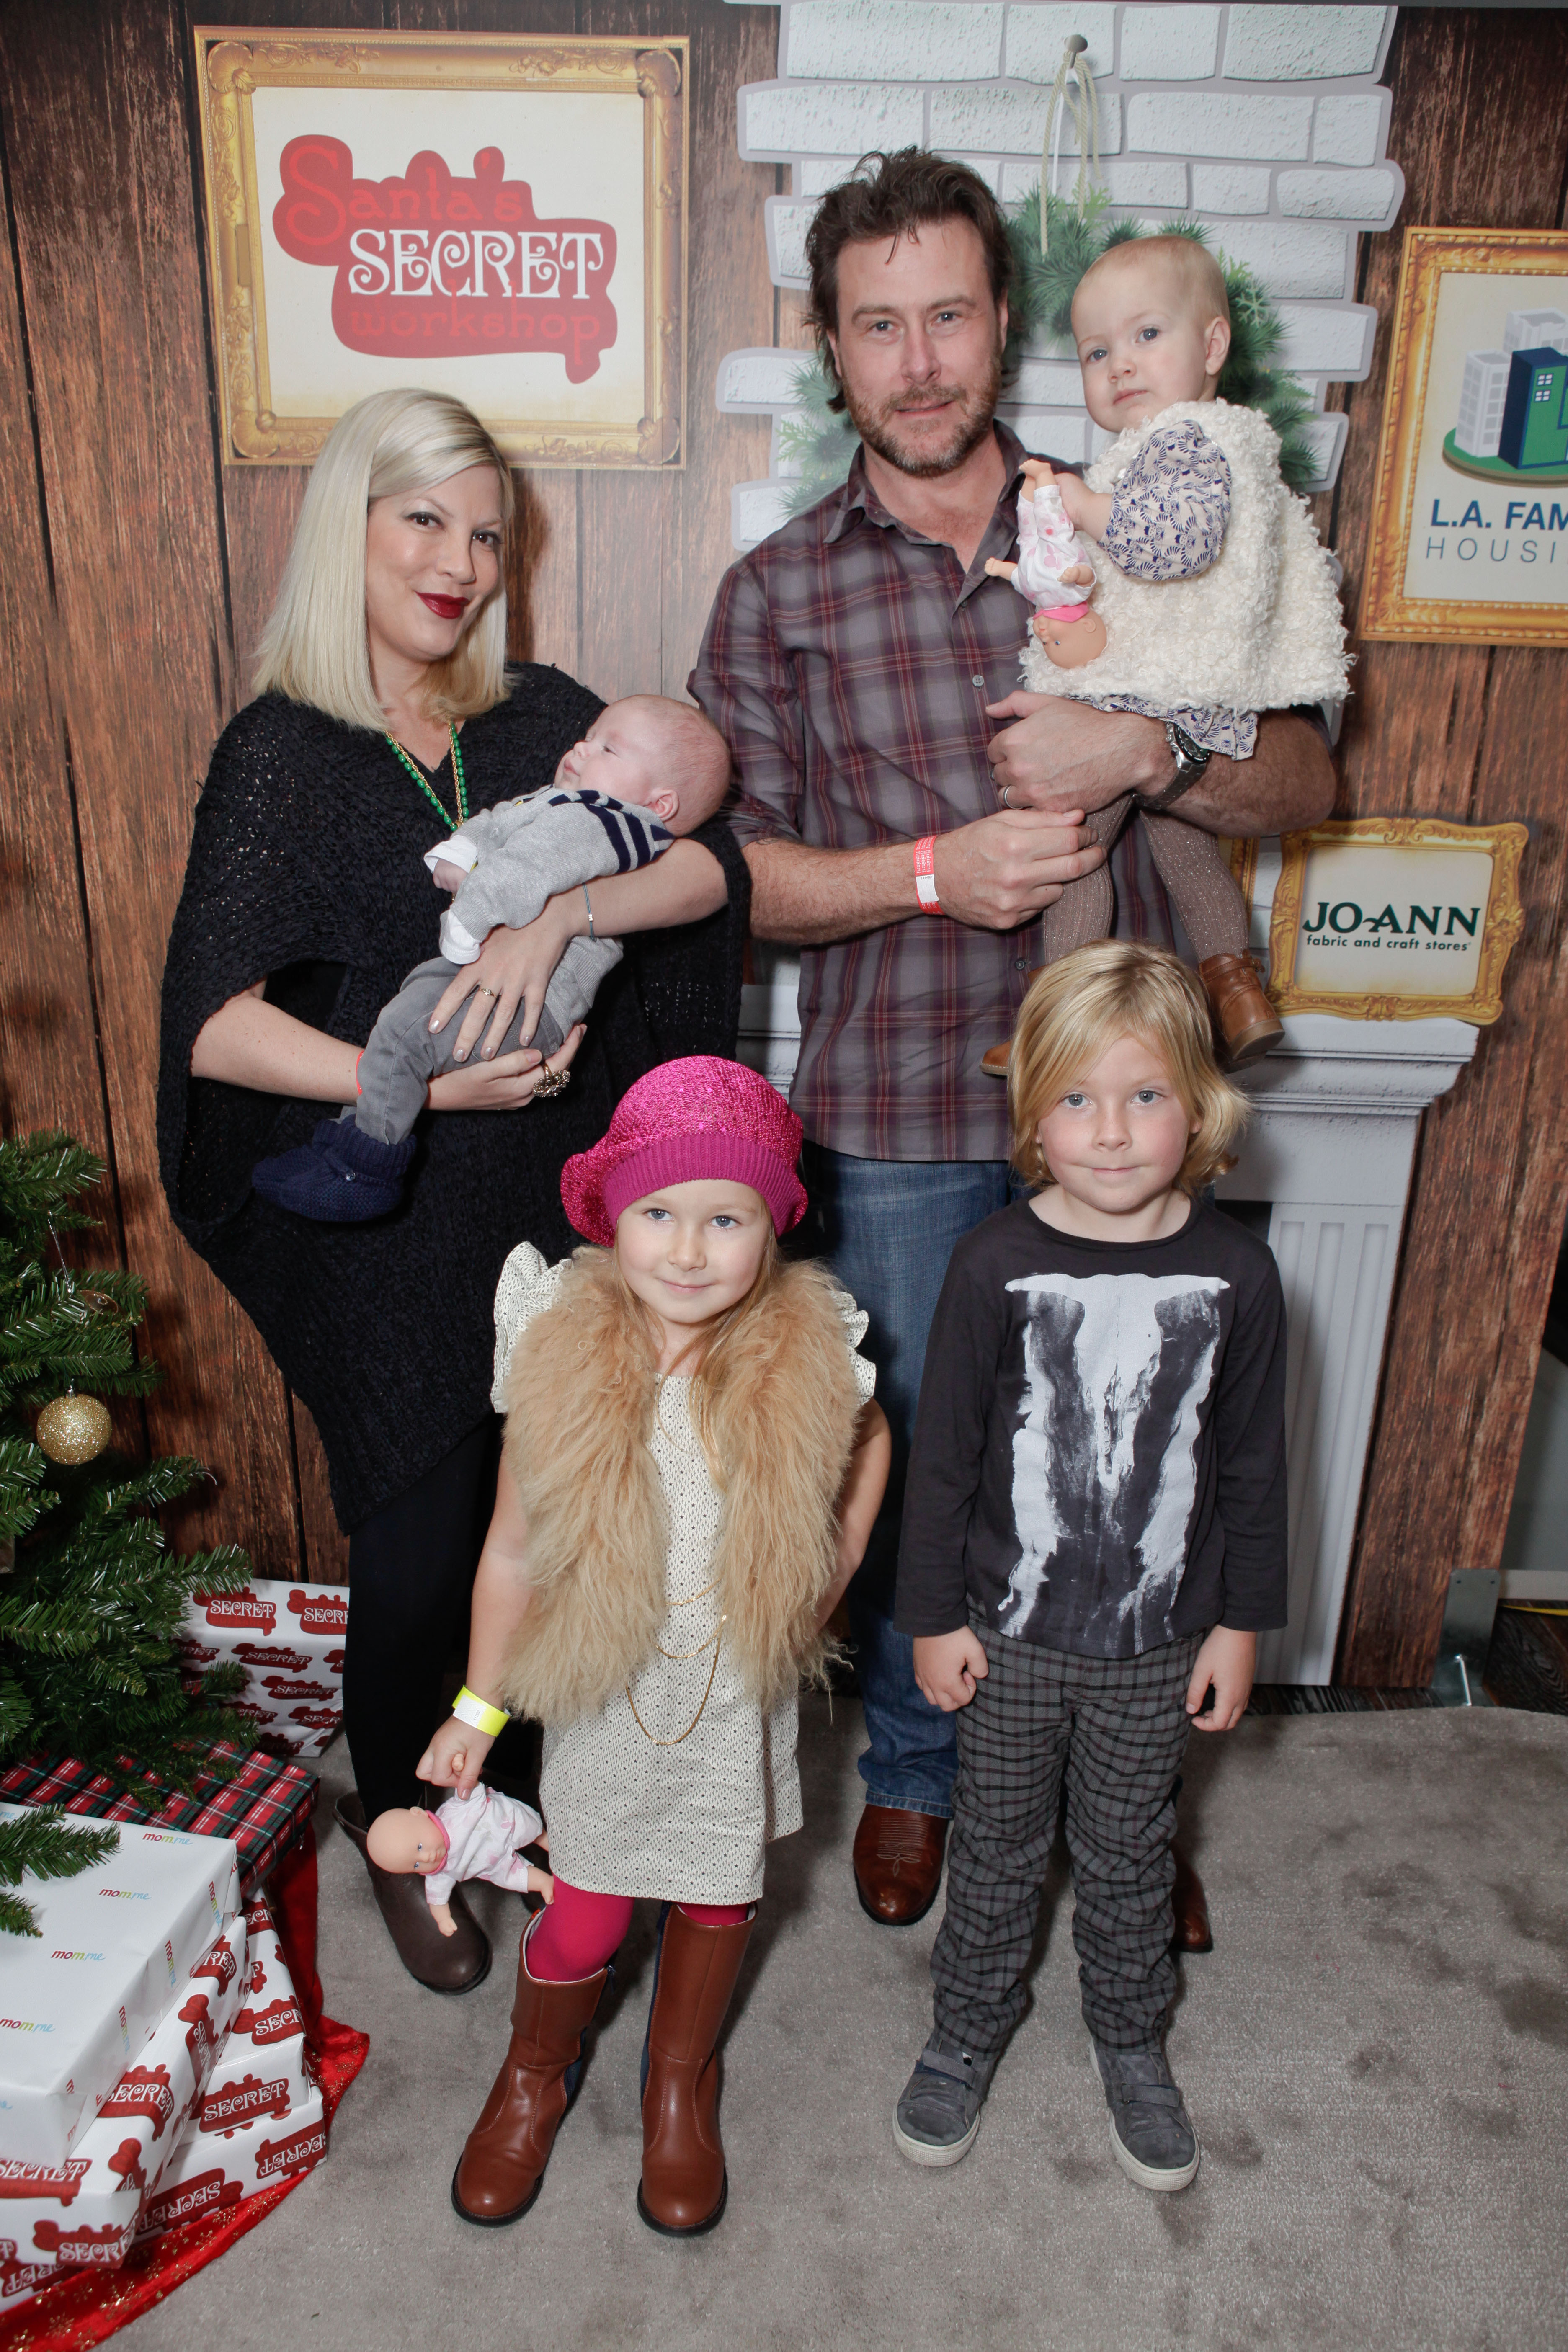 Tori Spelling holding her son Finn alongside her husband Dean McDermott and their kids, Hattie, Stella and Liam attend the 2nd Annual Santa's Secret Workshop Benefiting L.A. Family Housing at Andaz on December 1, 2012 in West Hollywood, California | Source: Getty Images